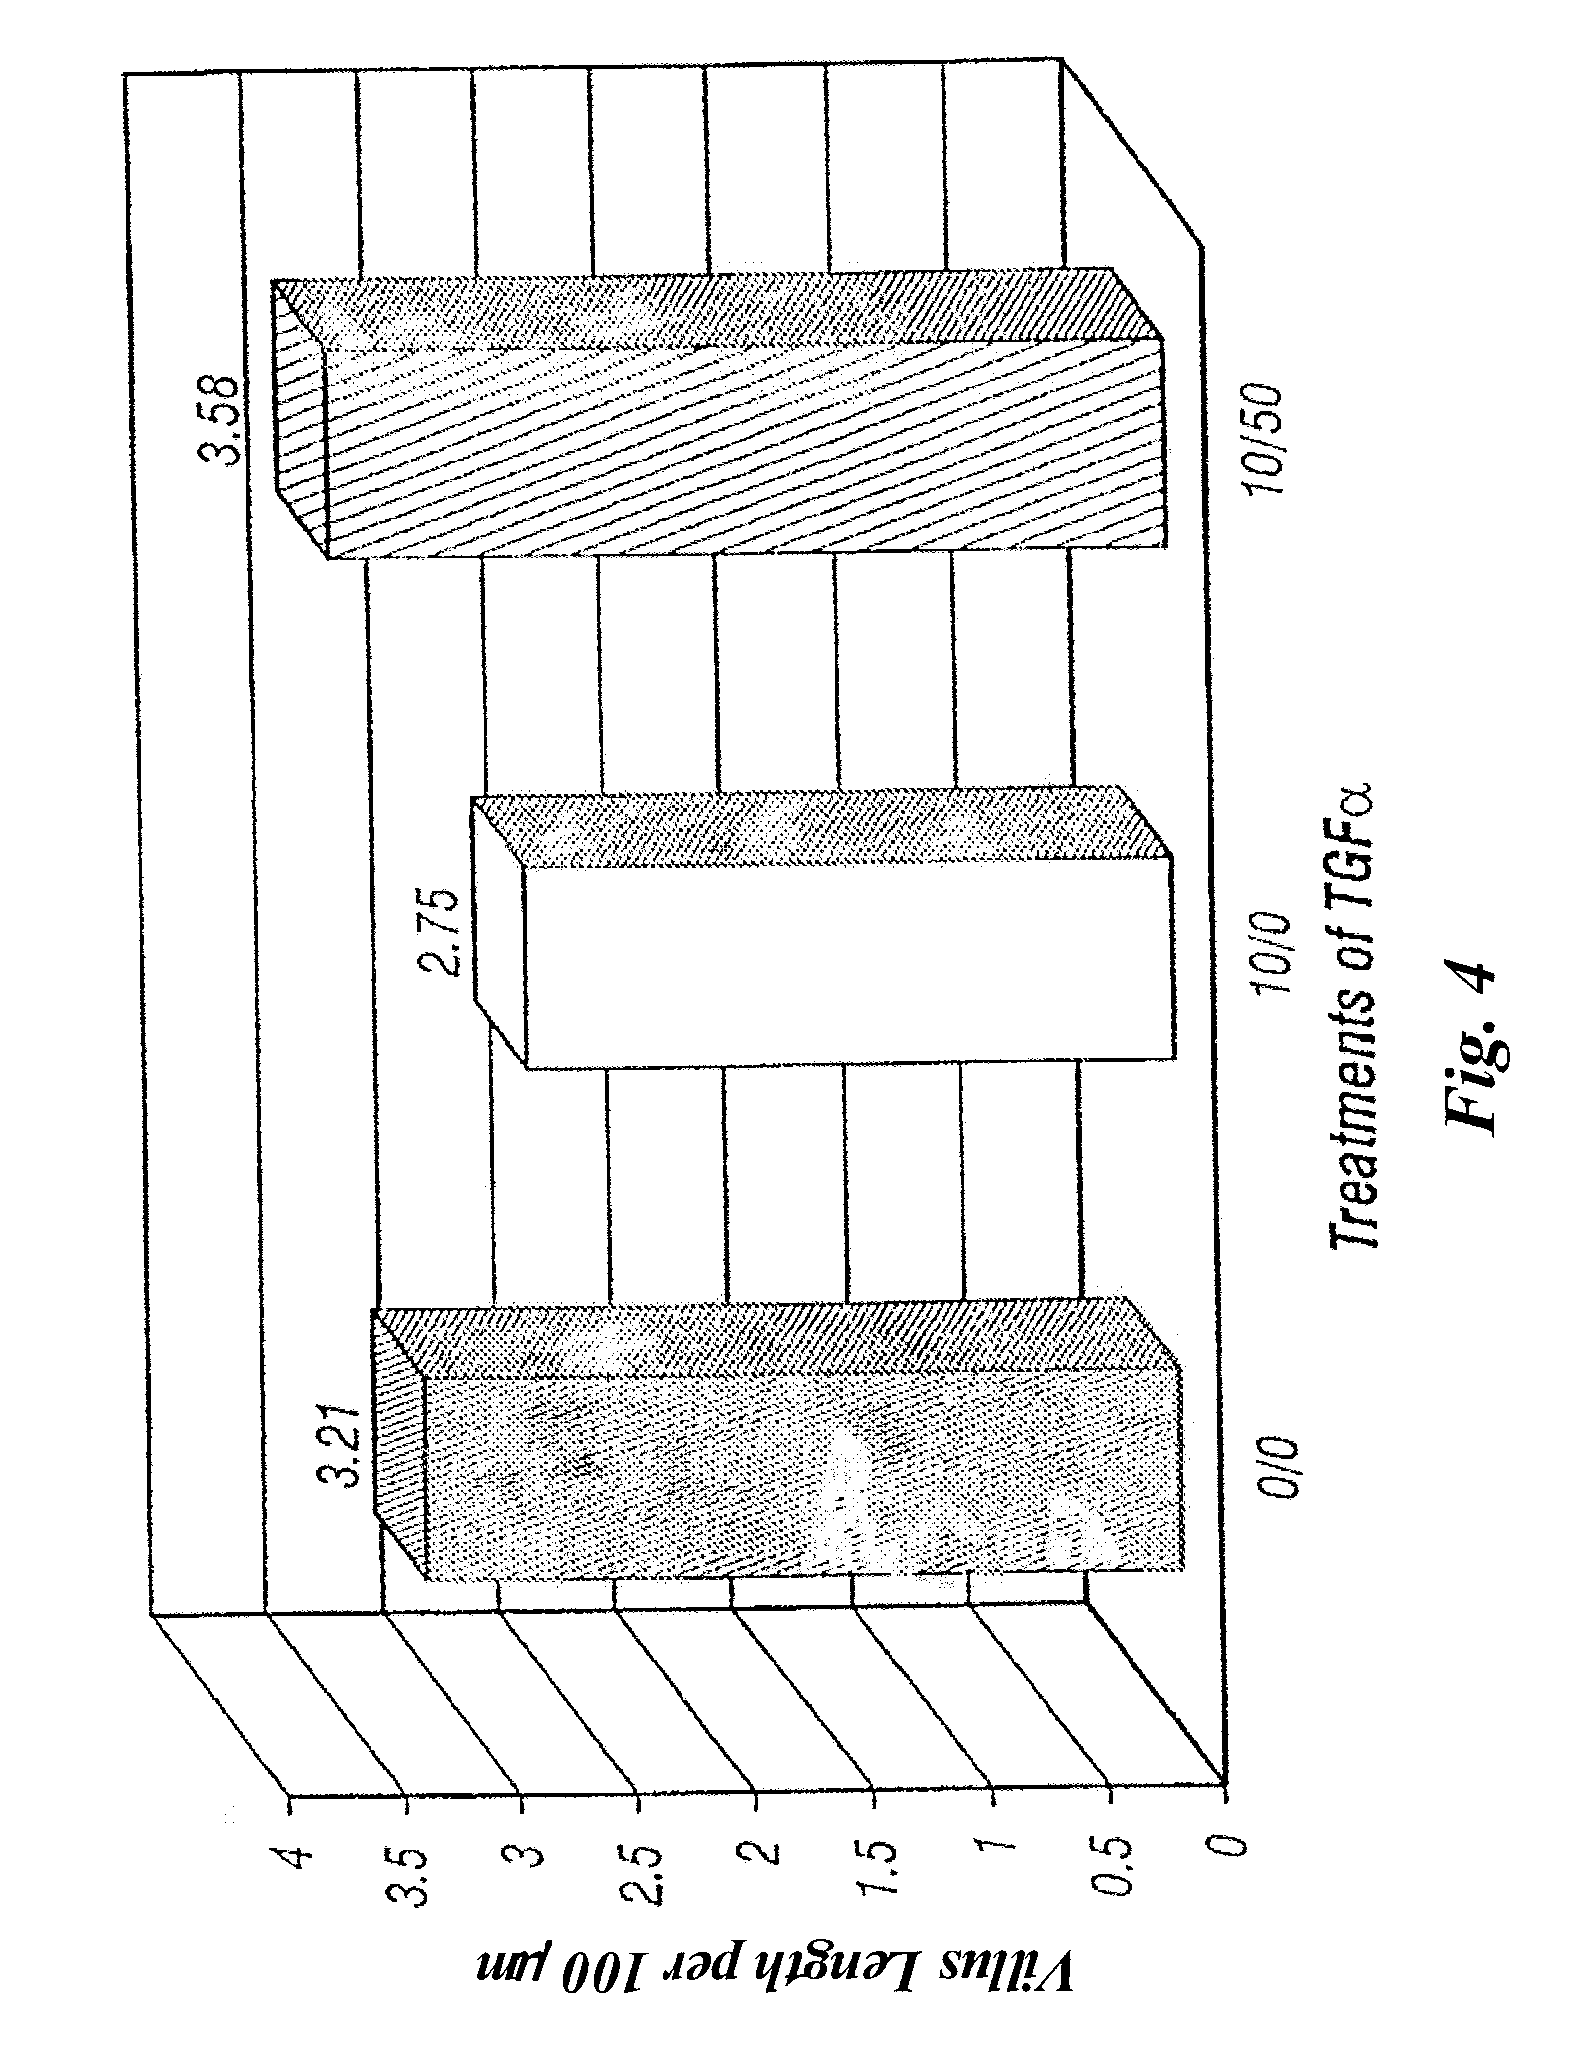 TGF-Alpha POLYPEPTIDES, FUNCTIONAL FRAGMENTS AND METHODS OF USE THEREFOR